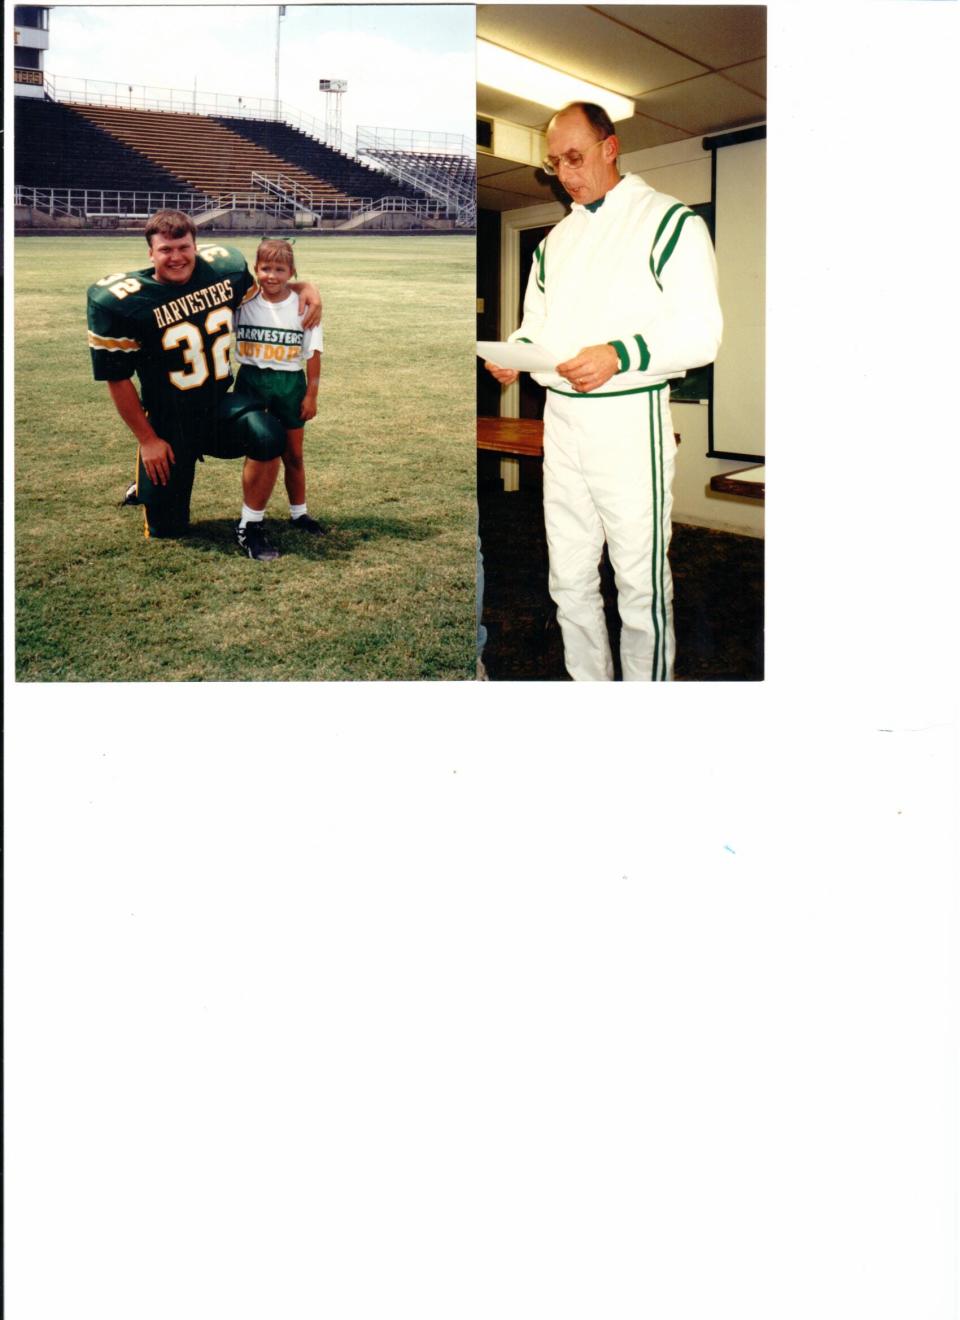 Zach Thomas (left) during his days at Pampa High School with a young fan.